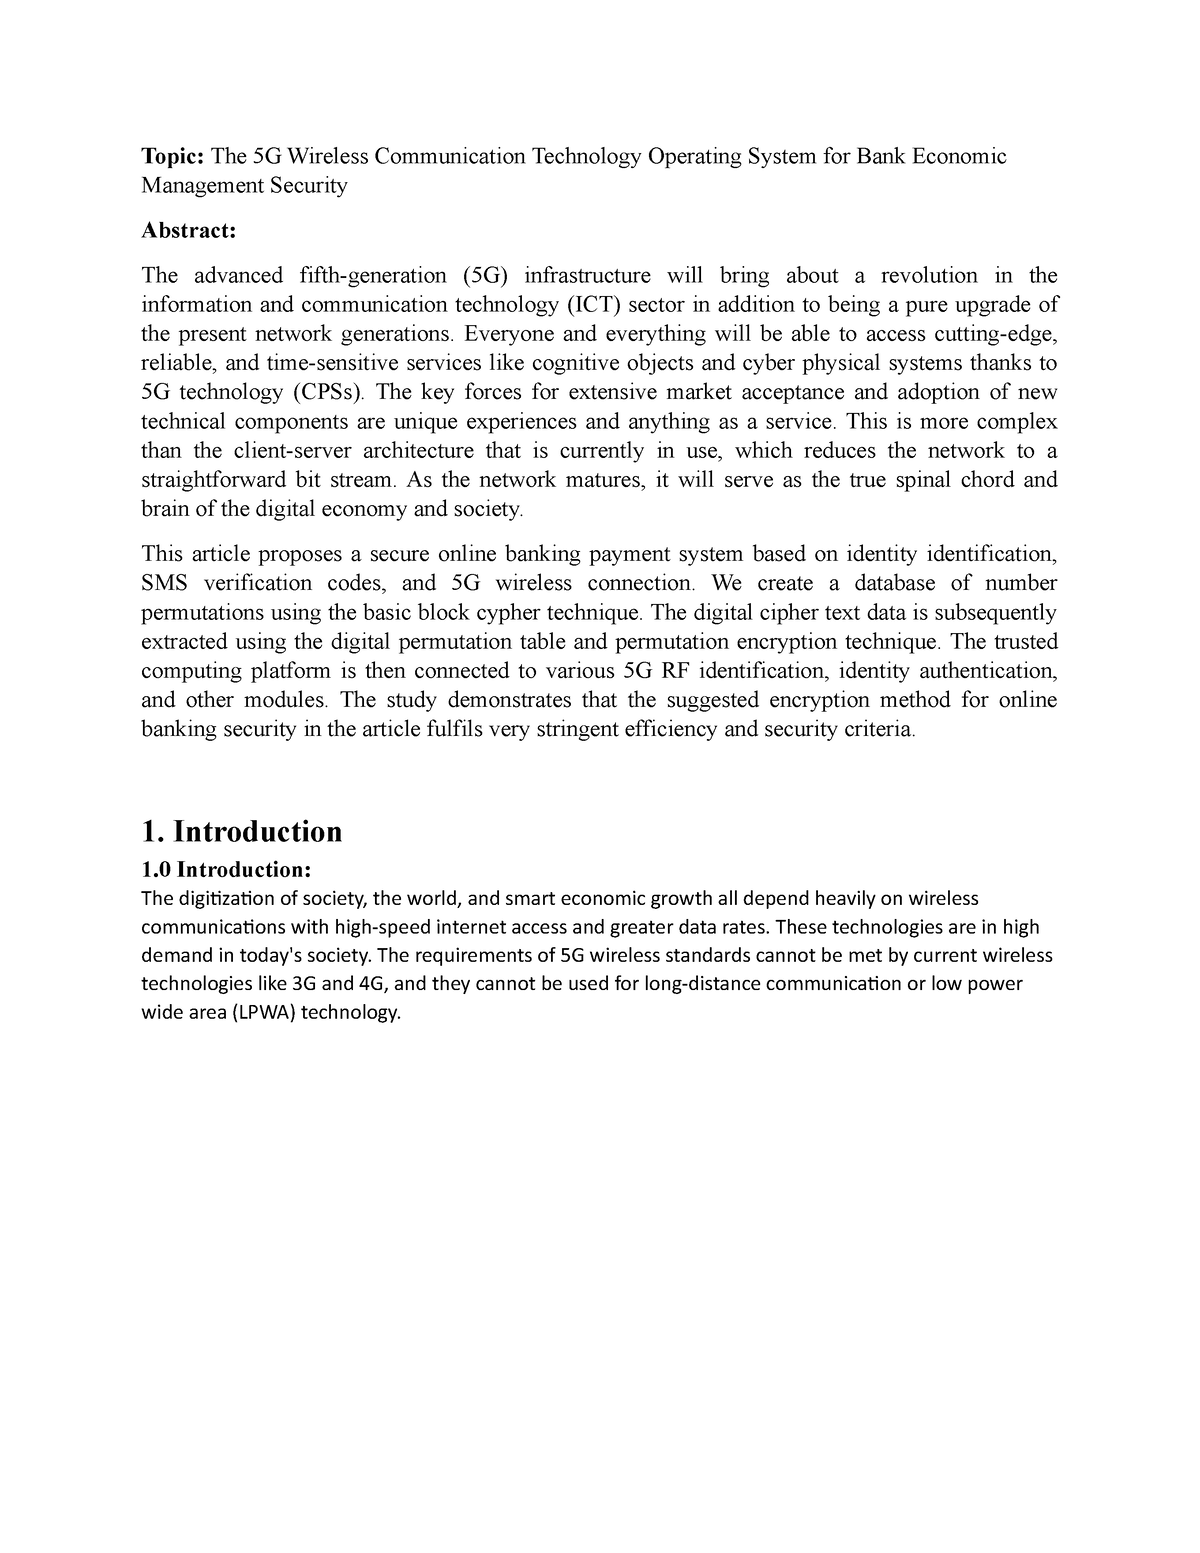 research proposal for phd in wireless communication